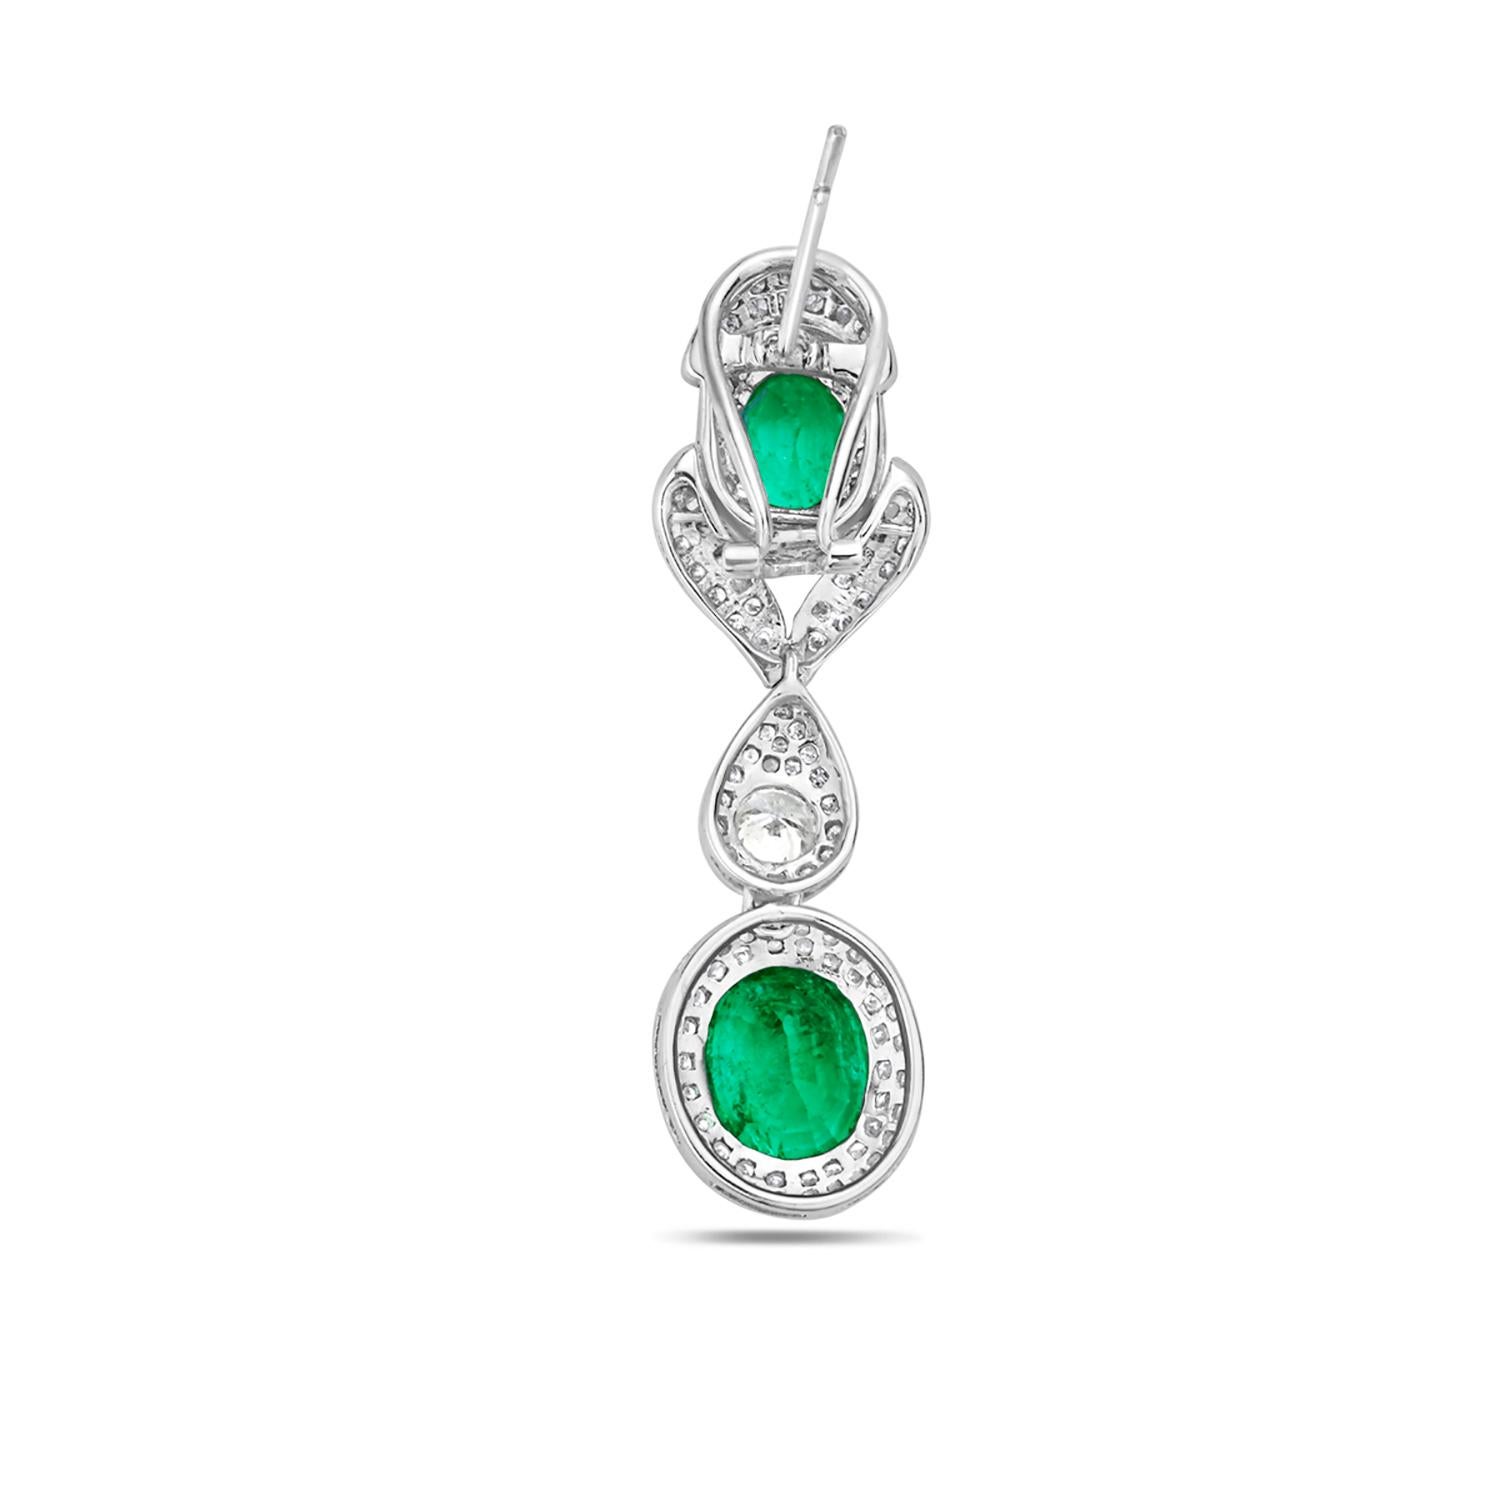 Contemporary Double Oval Shaped Emerald Earrings with VS Diamonds Made in 14k White Gold For Sale